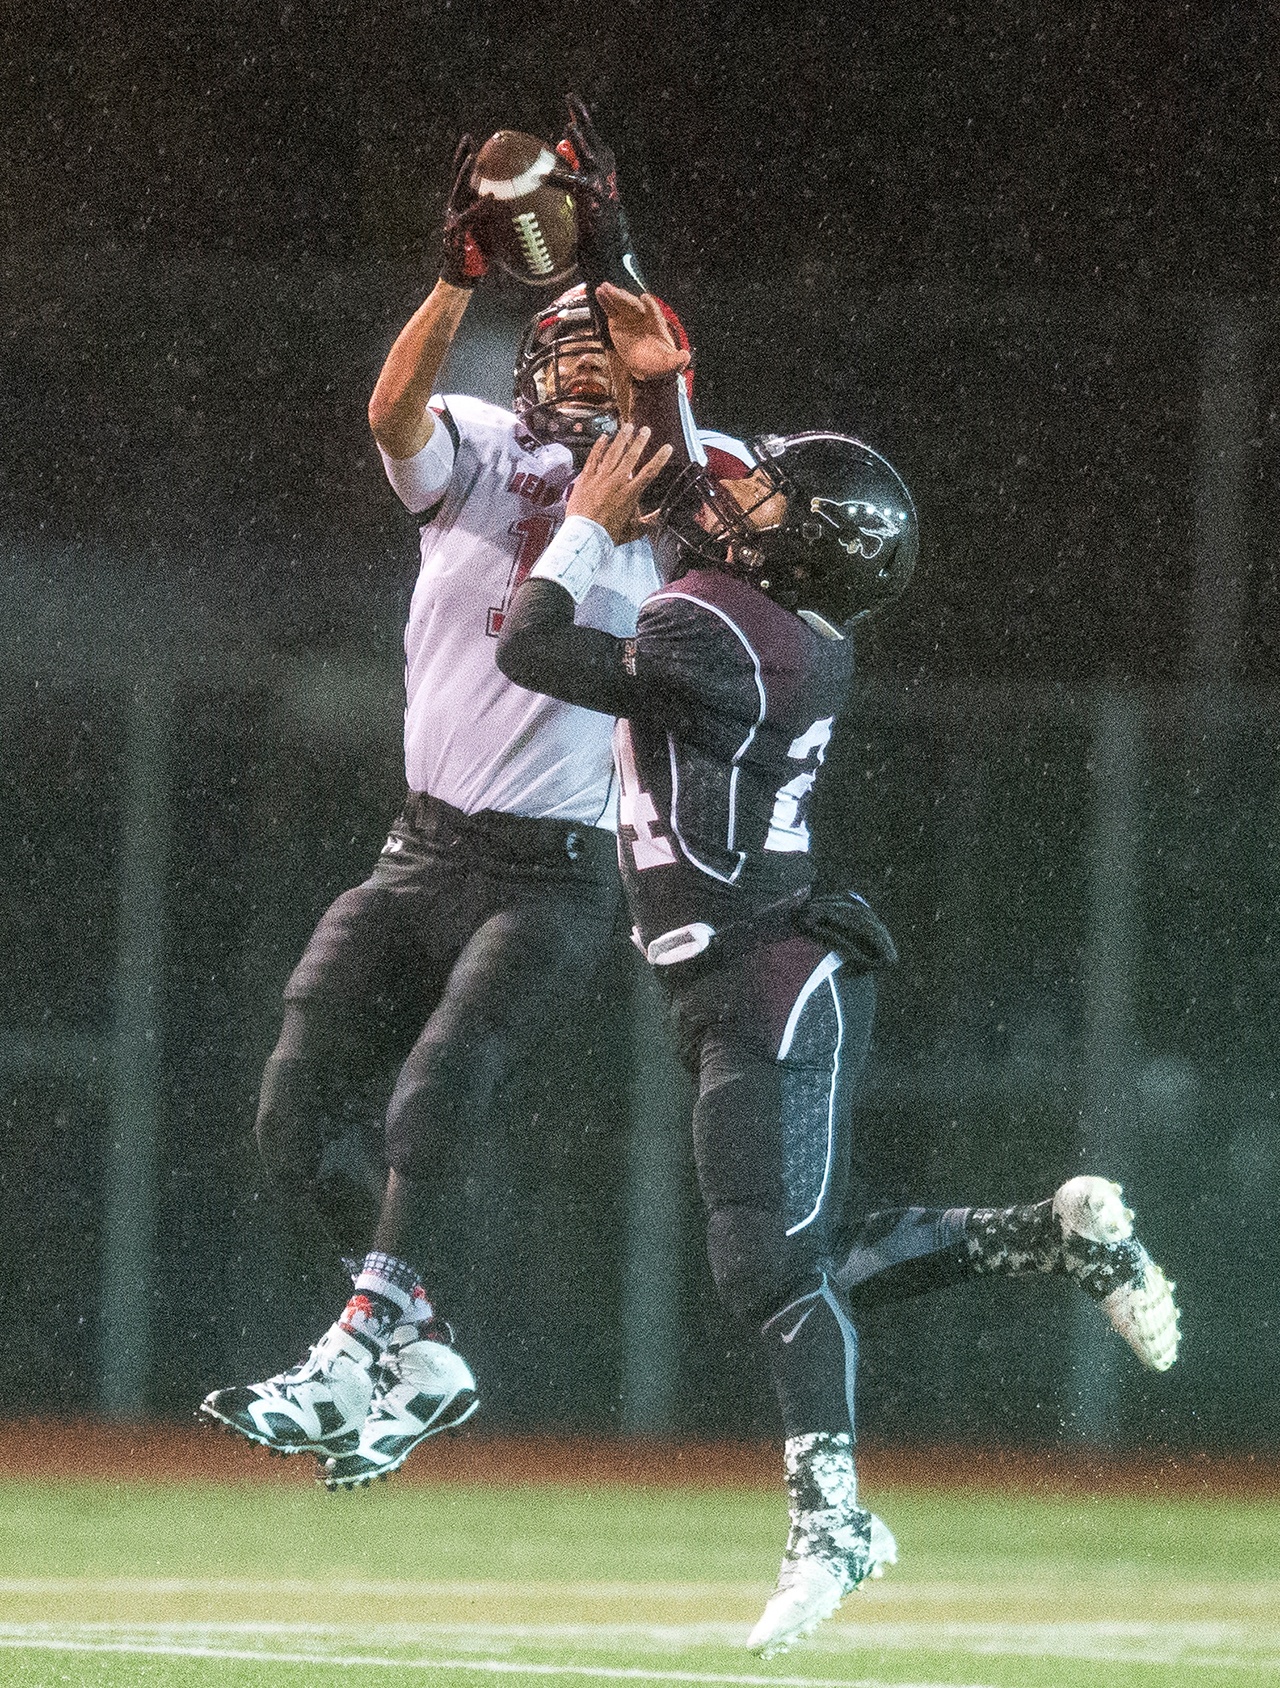 Evan Abell/Bellingham Herald Neah Bay’s Kenrick Doherty Jr., left, catches the eventual game-winning touchdown over Lummi’s Noah Toby during the state semifinals last week. Doherty and the Red Devils will play for their third state championship in four seasons at the Tacoma Dome on Saturday.